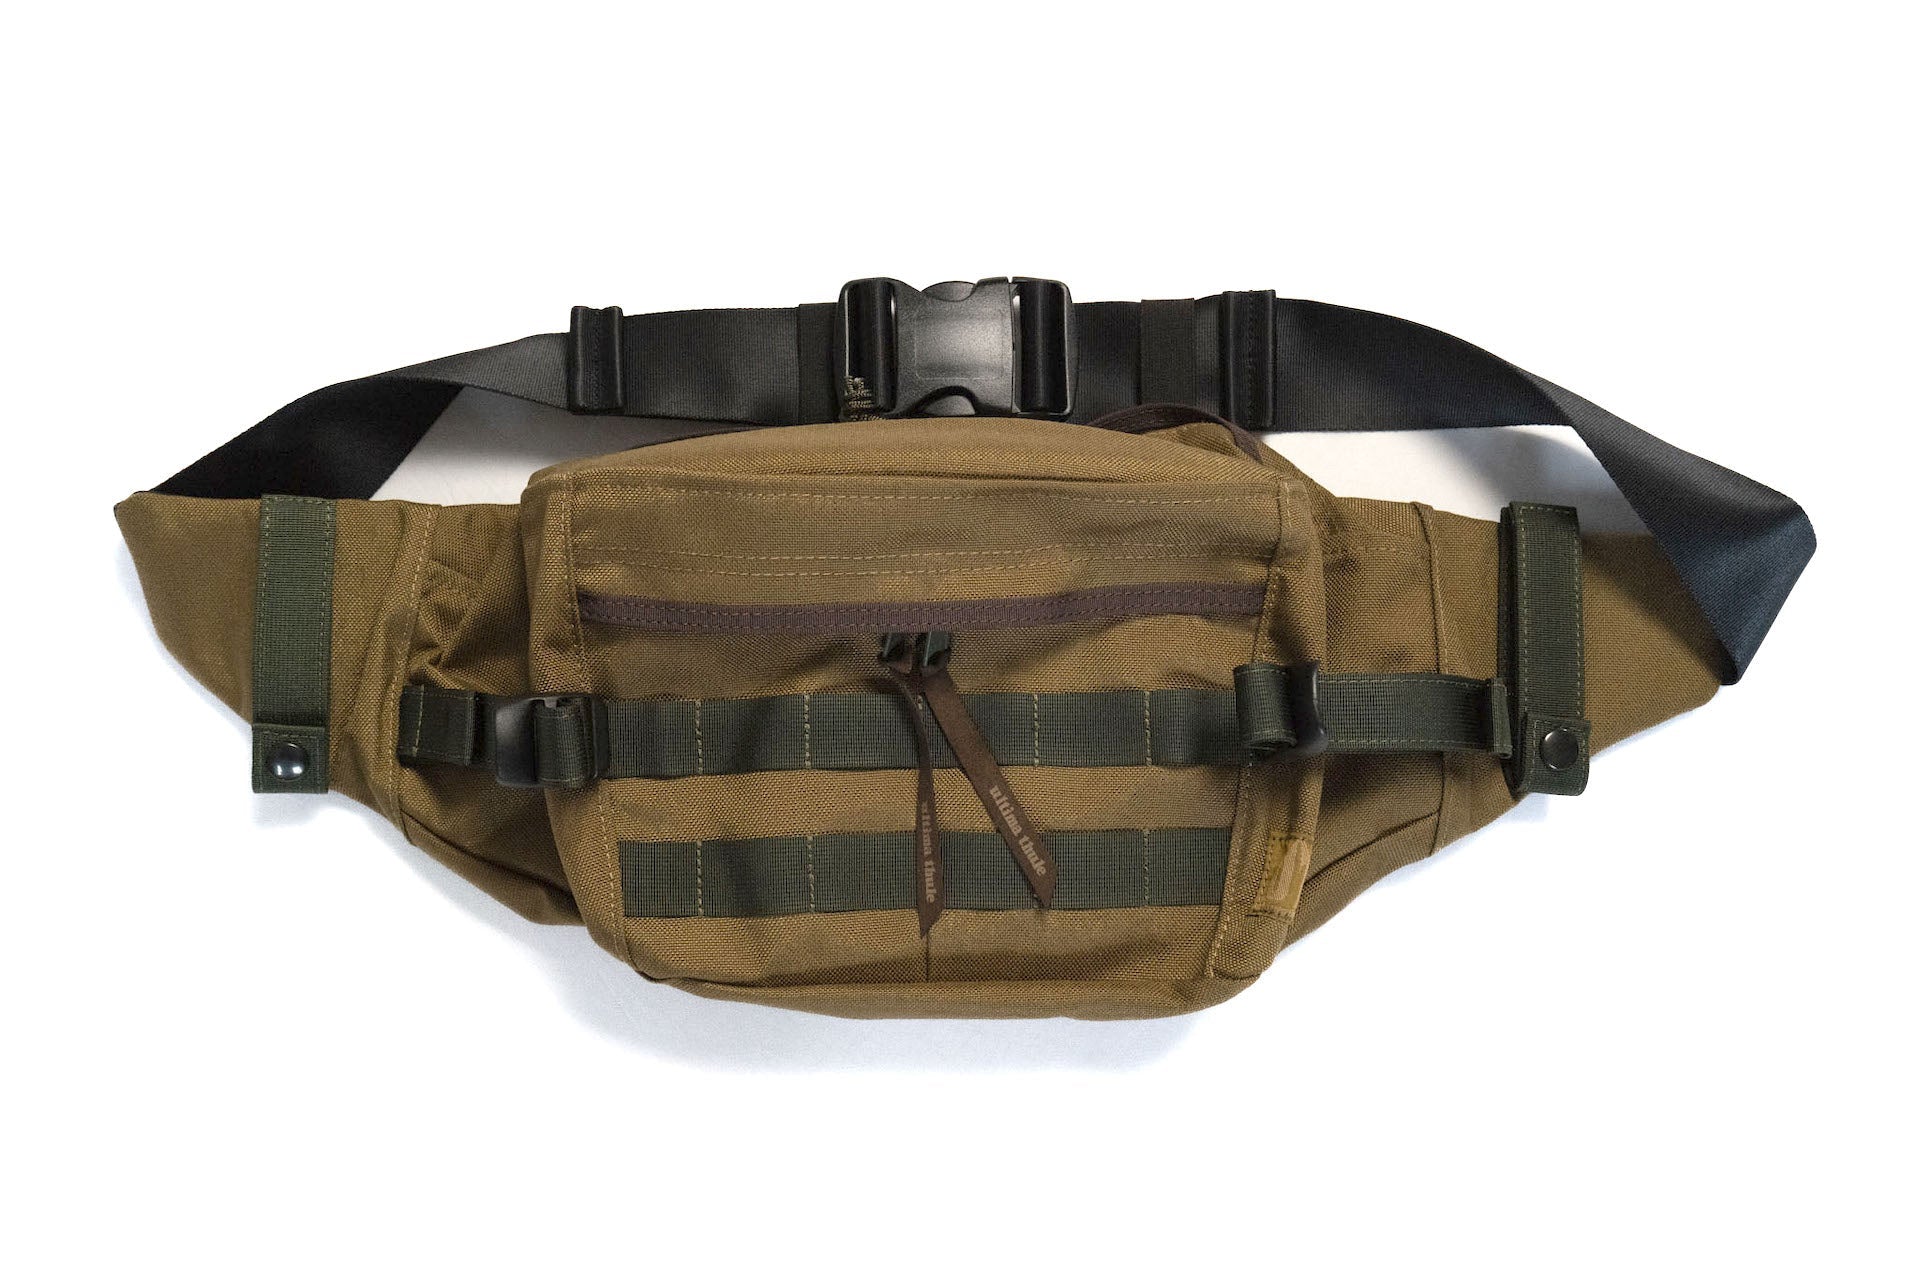 Ultima Thule by Freewheelers "HALF DOME" Fanny Pack (Coyote)